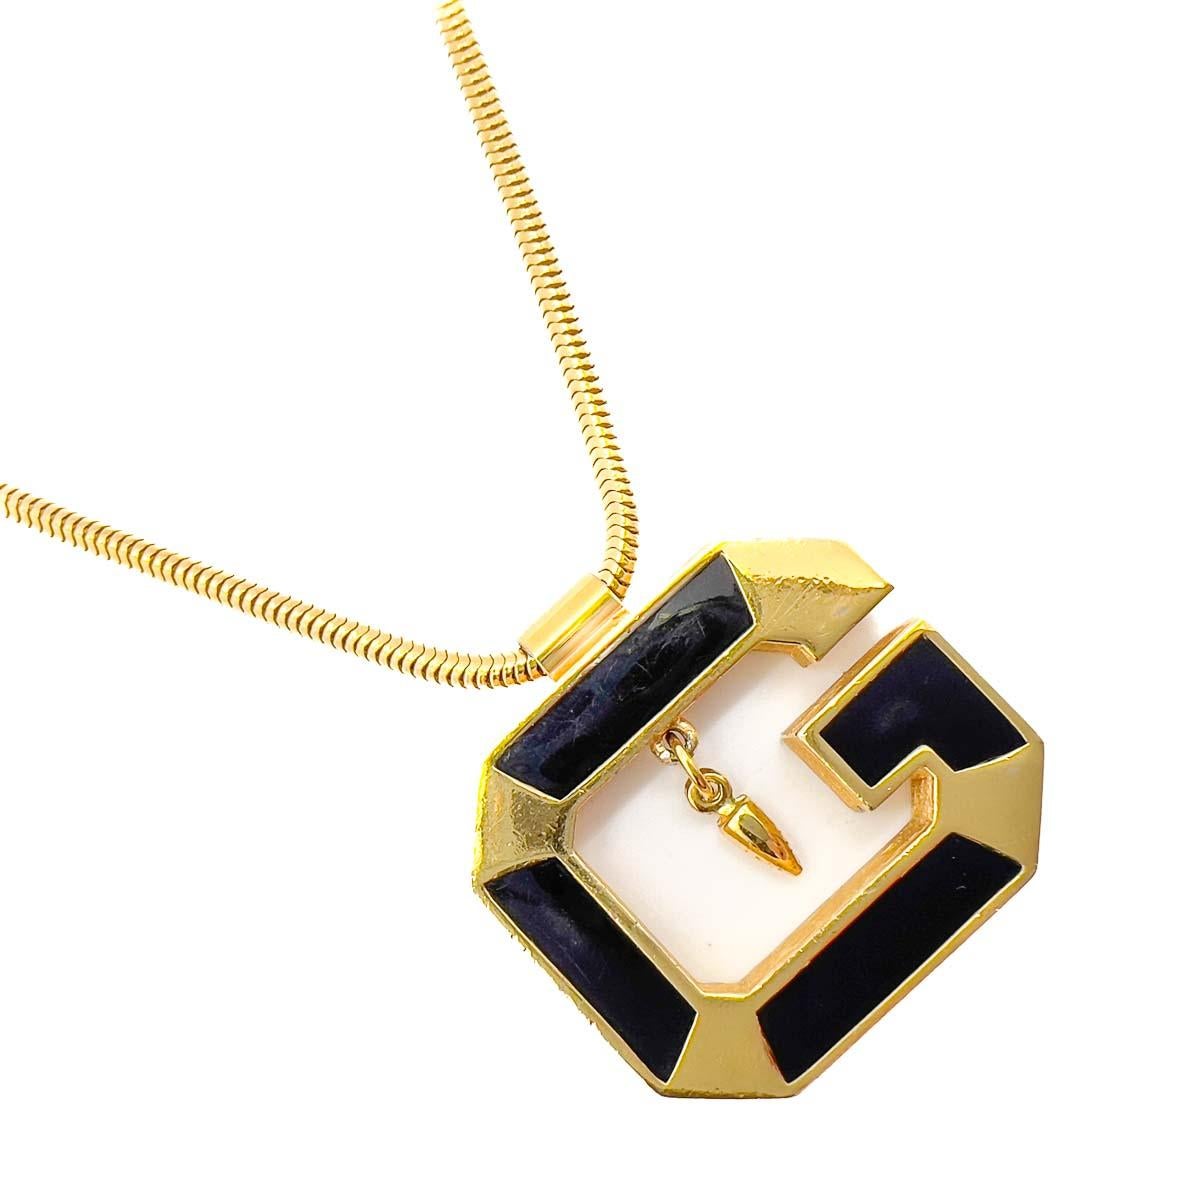 A super cool Vintage Givenchy G Necklace. A slinky snake chain adorned with a large Givenchy G. Enamelled in black and finished with a central drop this Givenchy jewel is a couture logo lover's dream.
One of the late great 20th century couturiers,